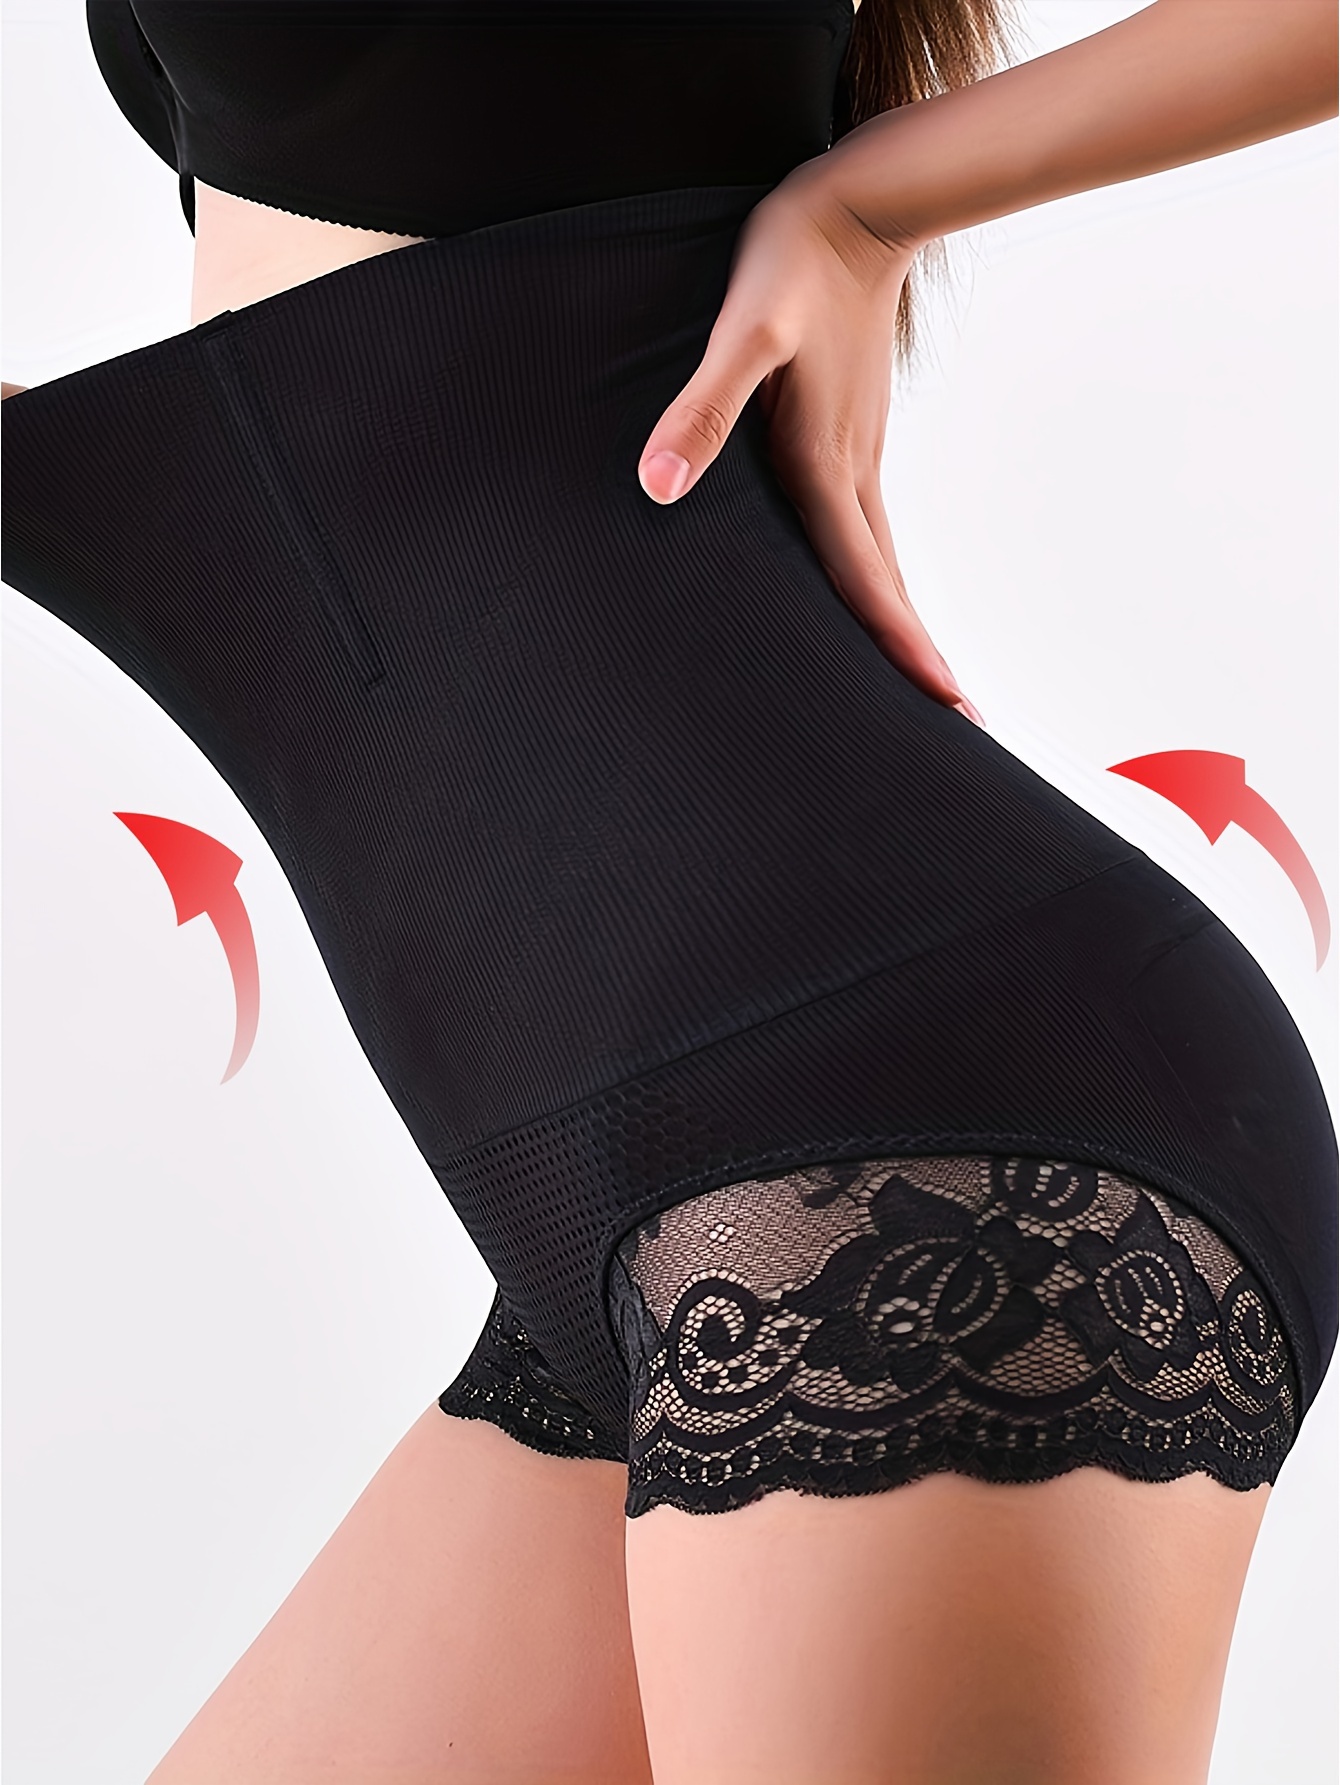 Women's shapewear slip panties made of shiny material with a high waist,  satin trim and lace inserts Babell BBL103 buy at best prices with  international delivery in the catalog of the online